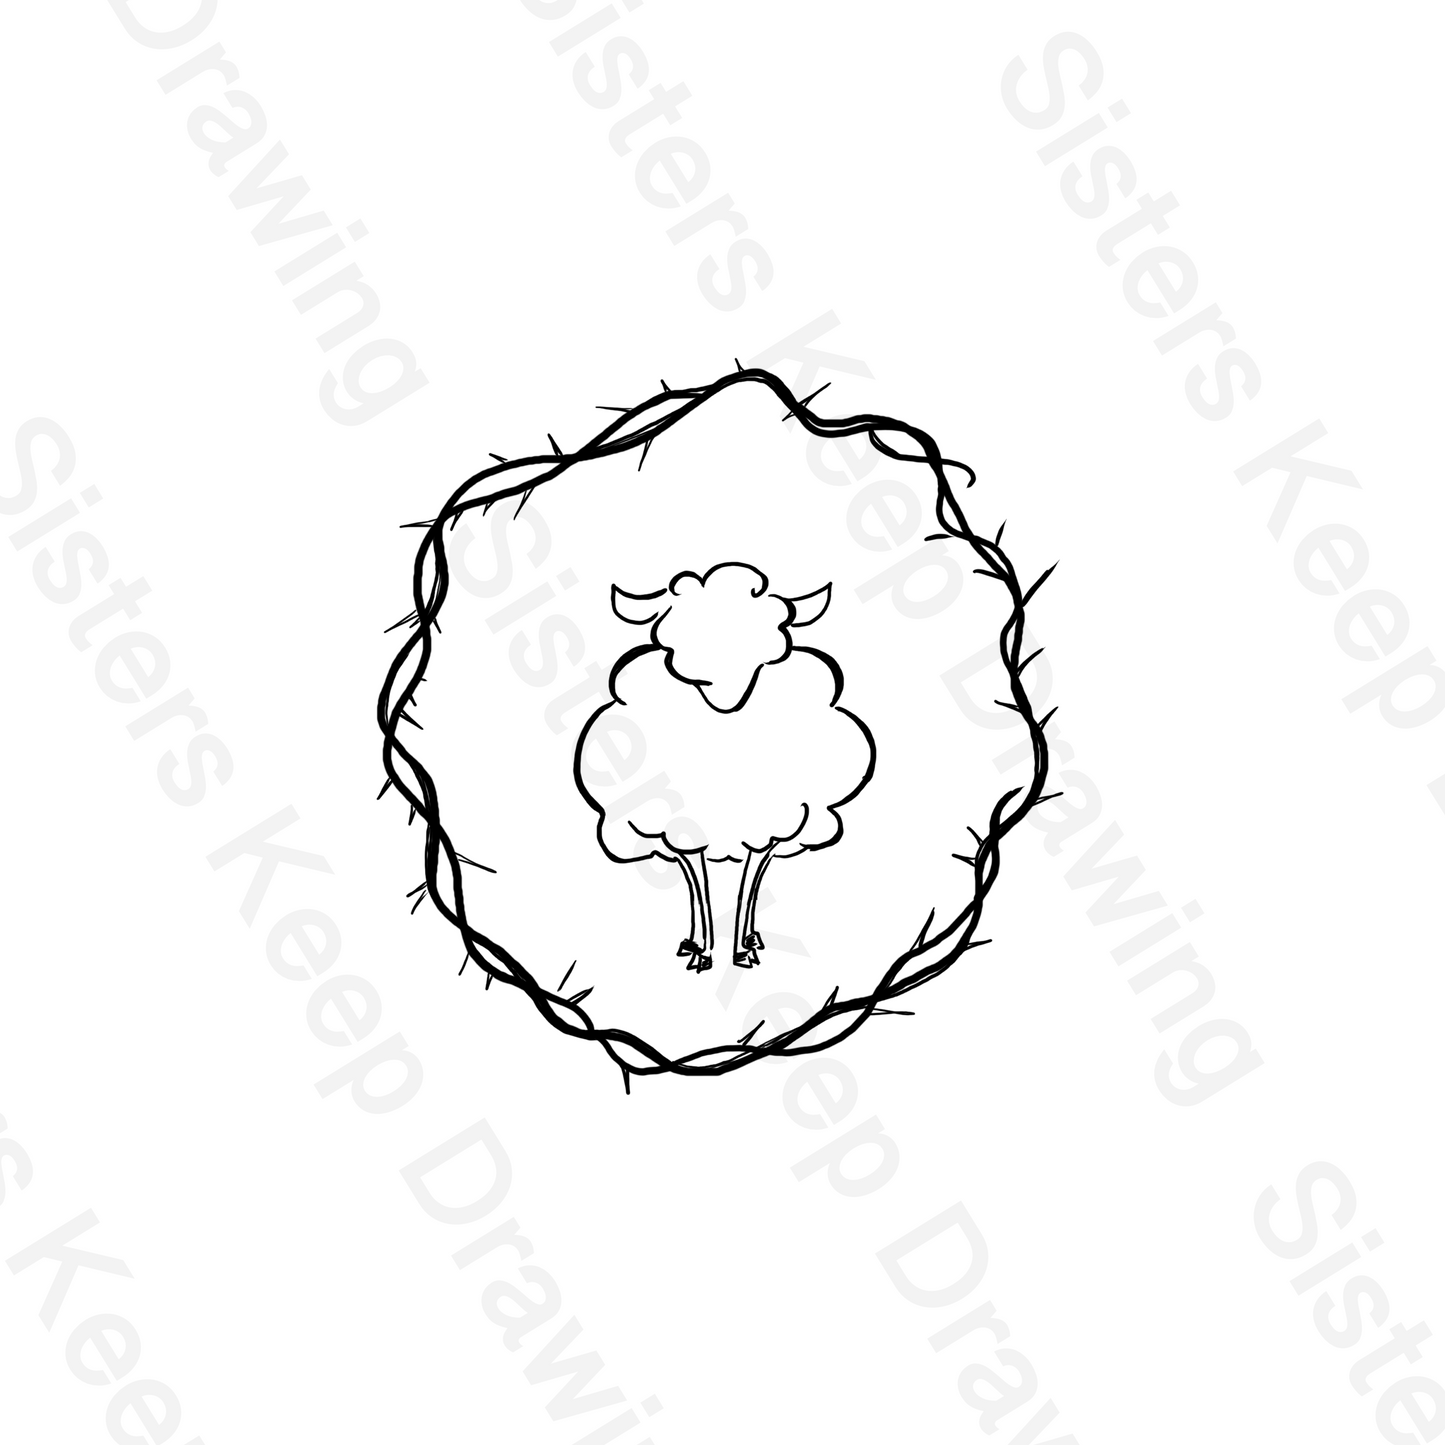 Little Lamb with Crown of Thorns - Tattoo Transparent PNG